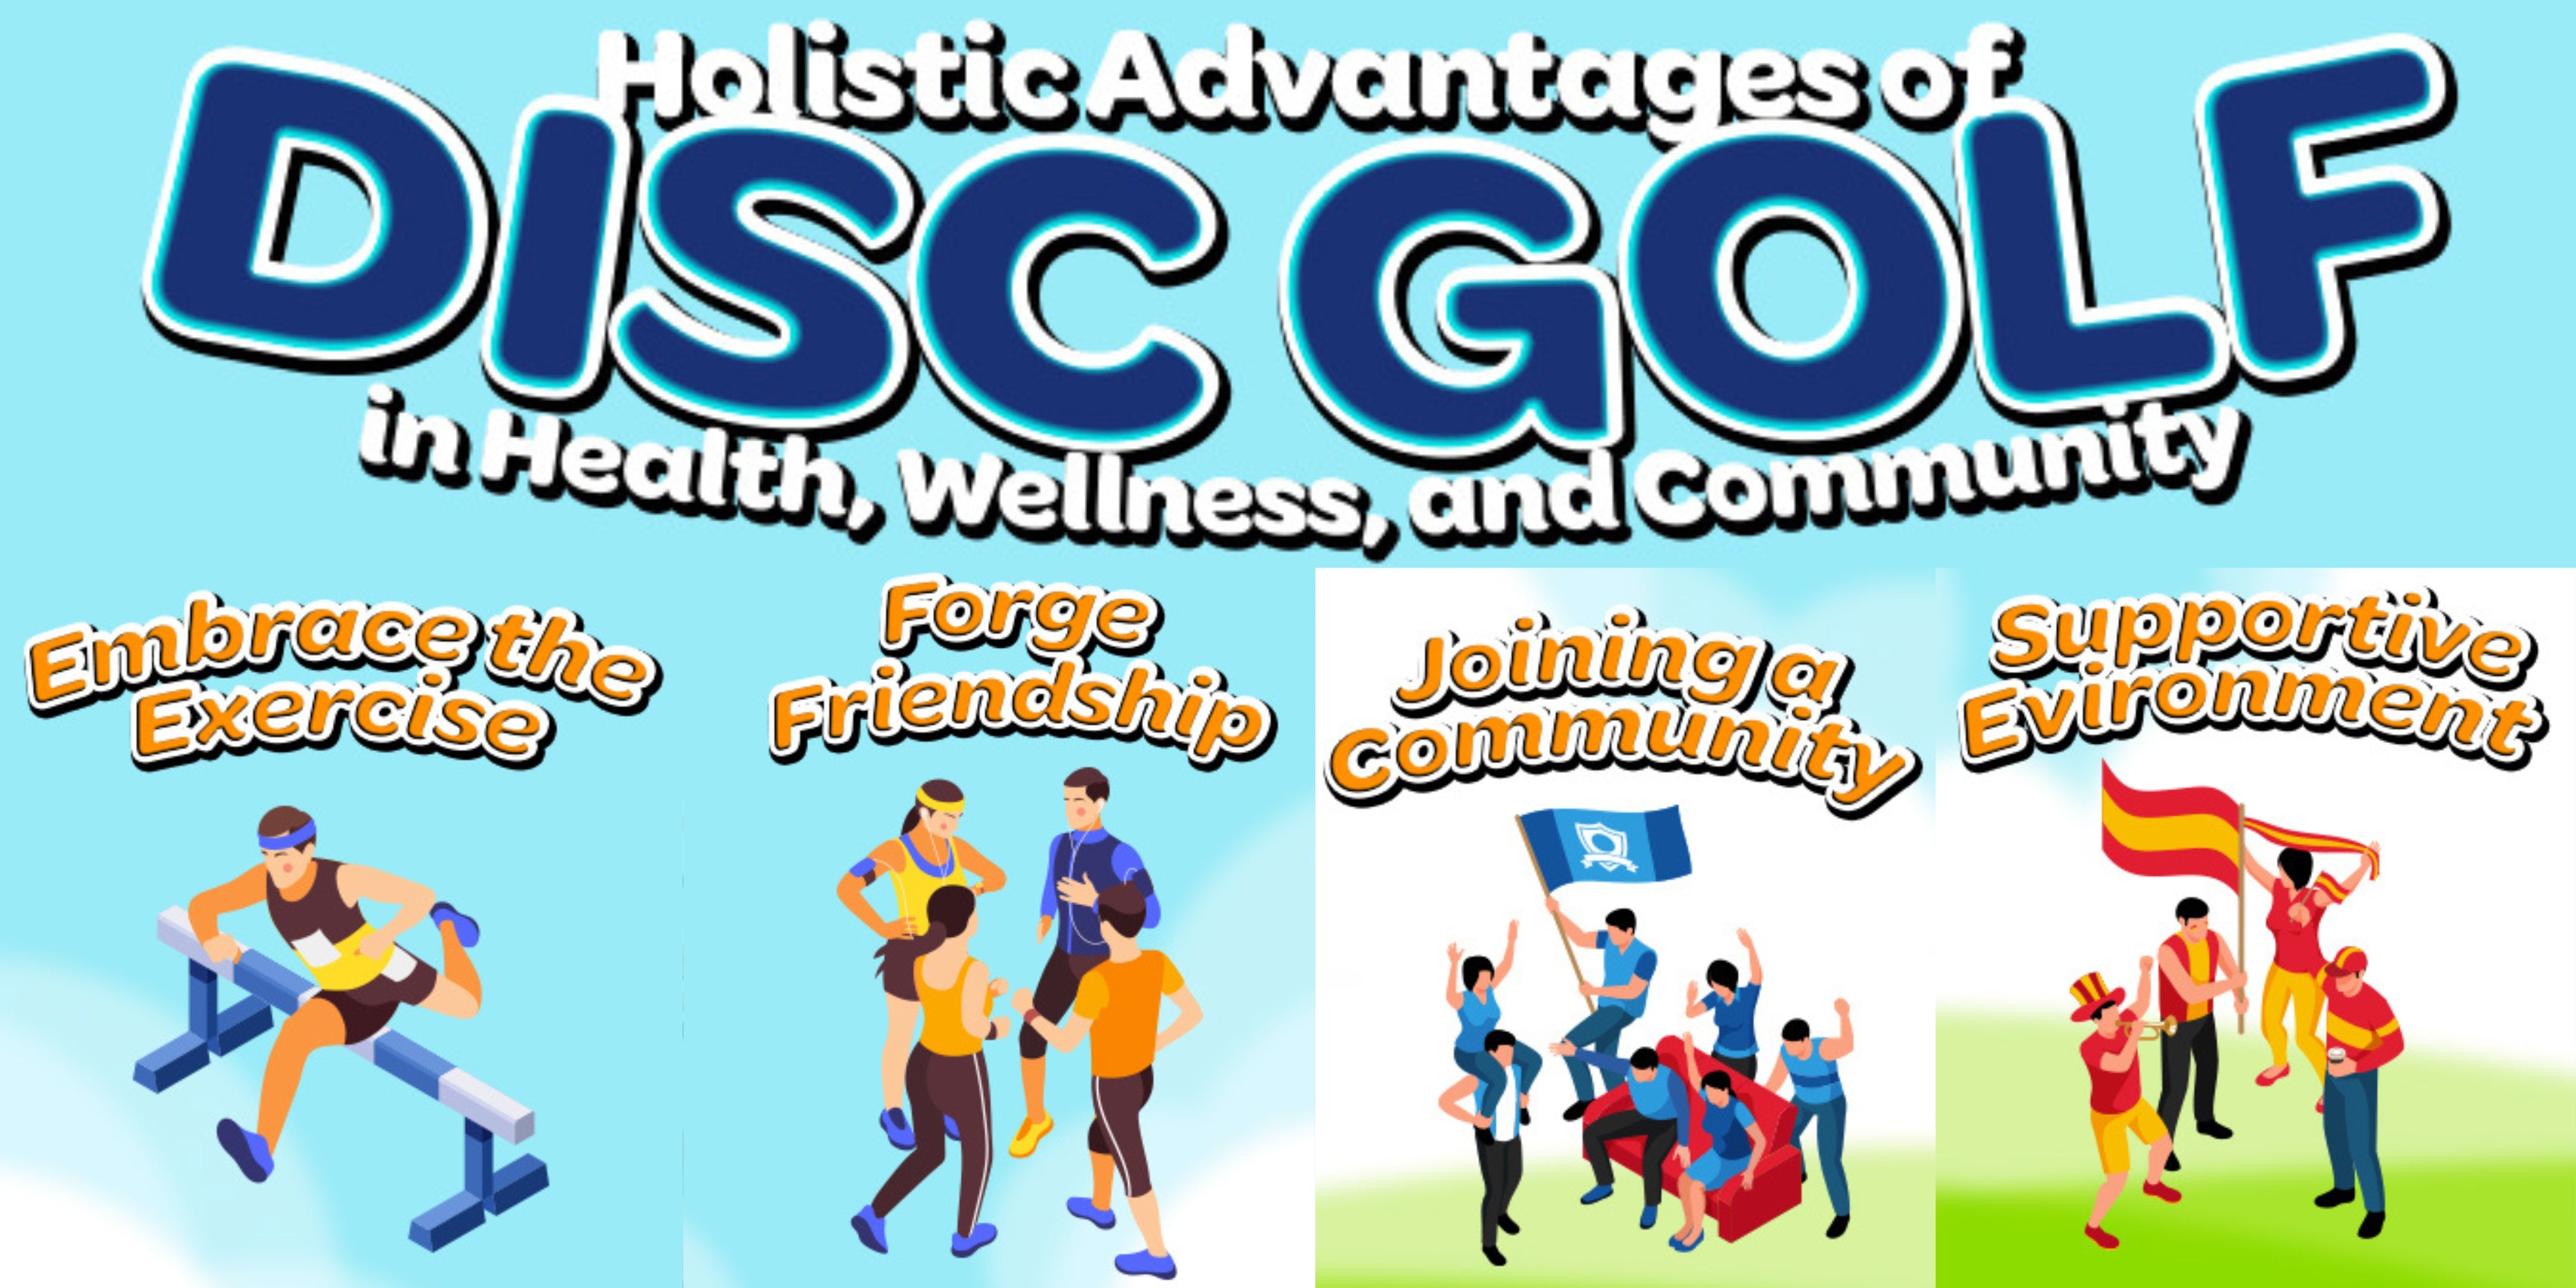 Holistic Advantages of Disc Golf-Ace Your Health with Disc Golf: Exercise, Community, and Fun